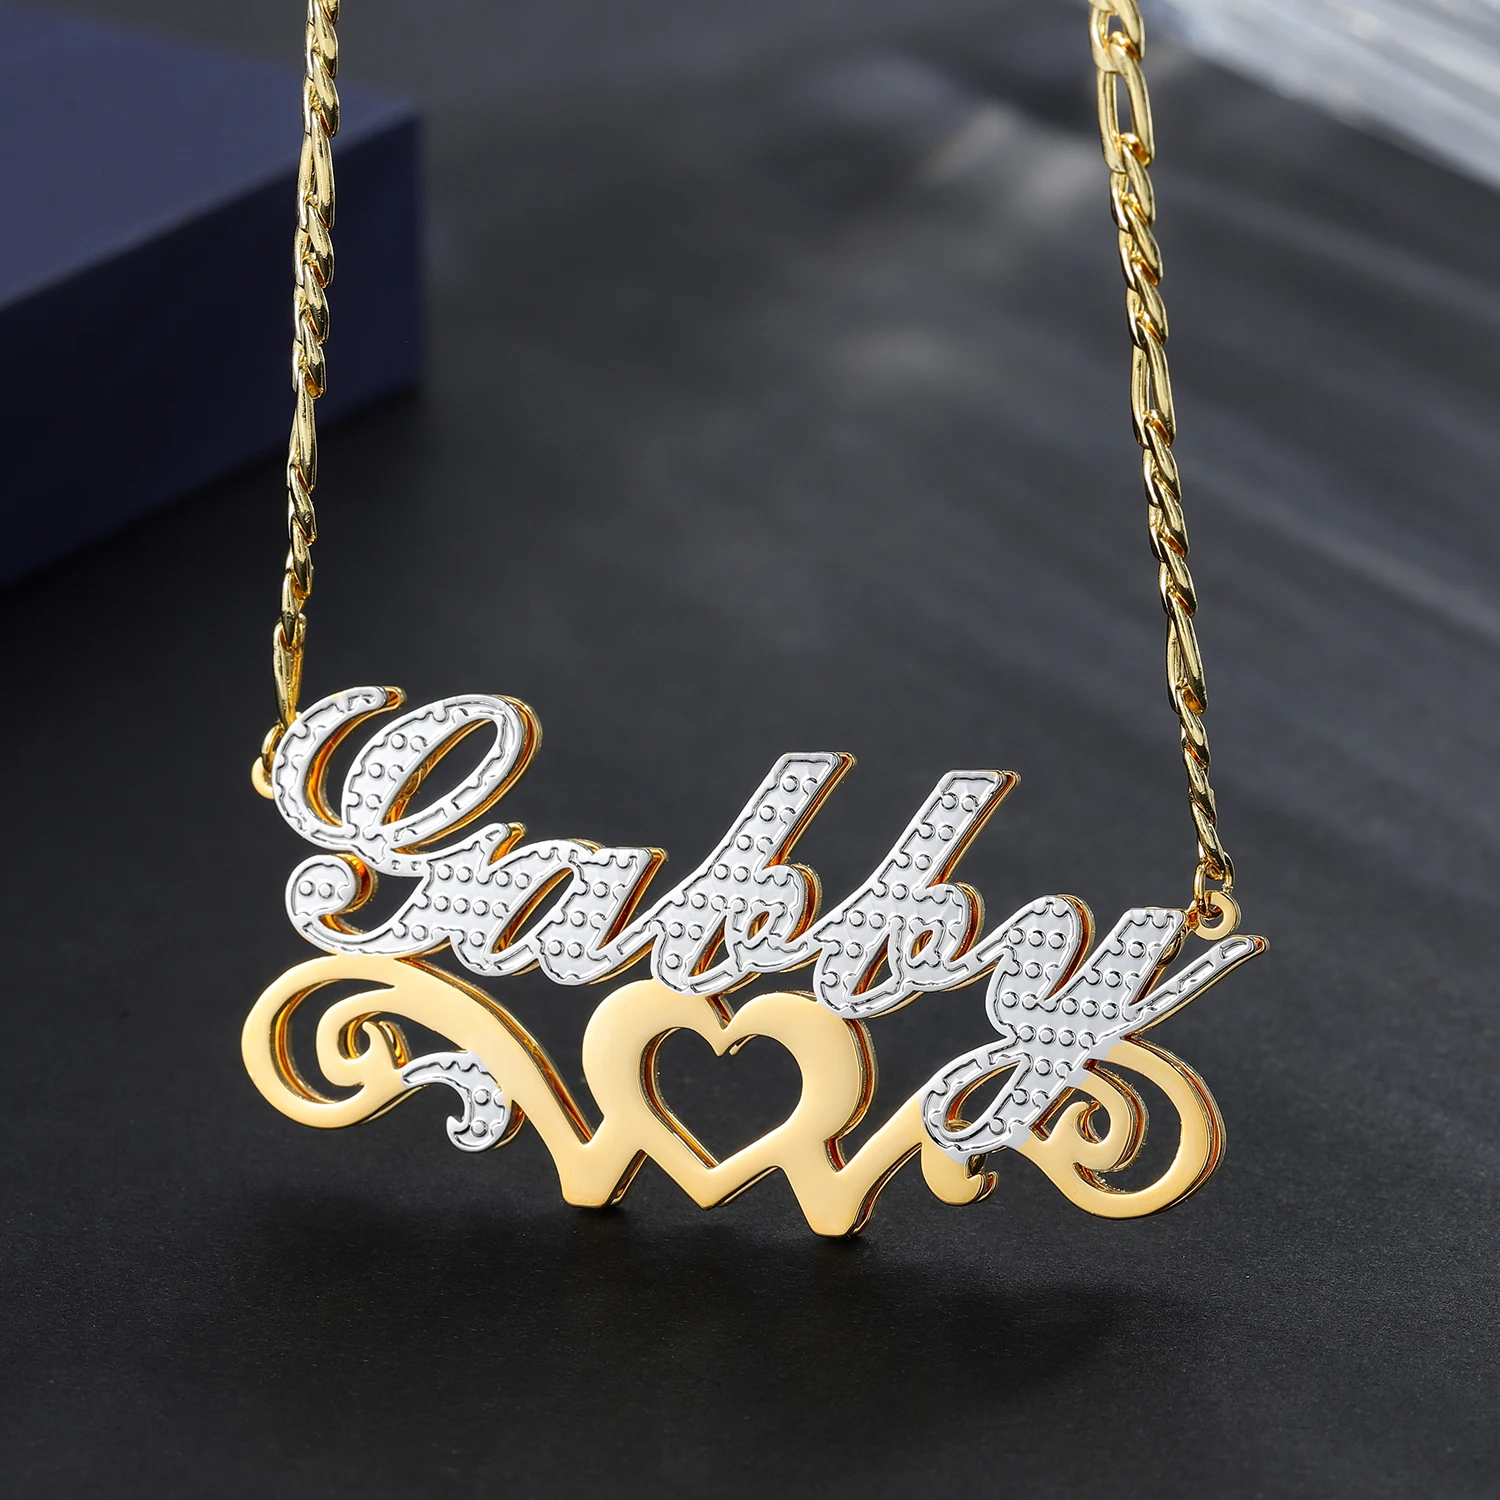 Customized Necklace Double Plated Heavenly Love Name Necklace For Women Name Plate Stainless Steel Name Pendant Charm Jewelry heavenly minded mom